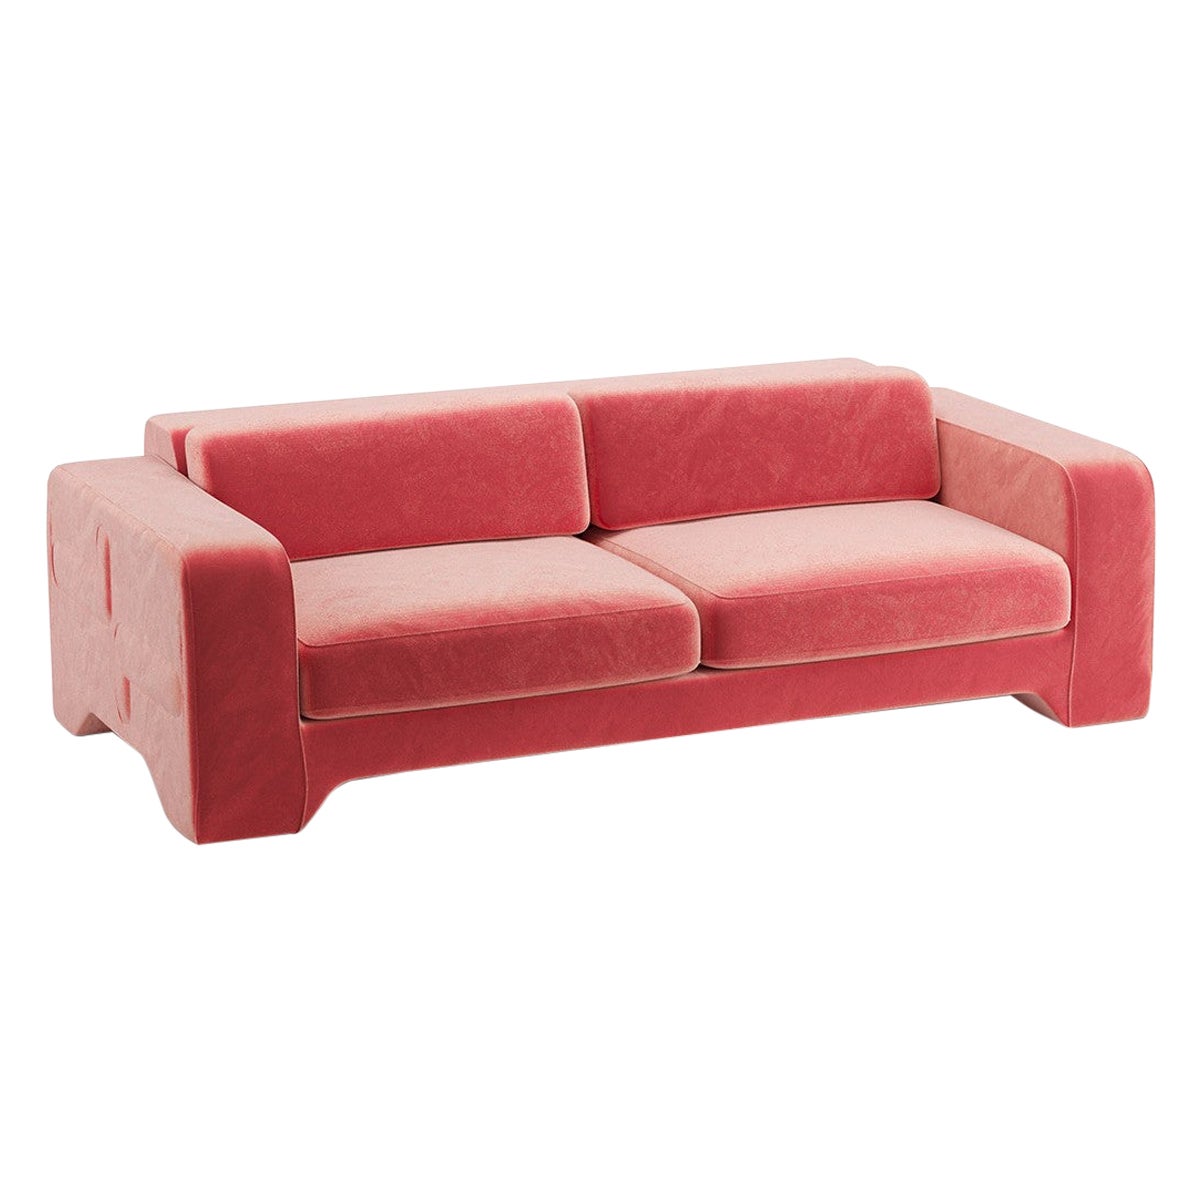 Popus Editions Giovanna 2.5 Seater Sofa in Pink Como Velvet Upholstery